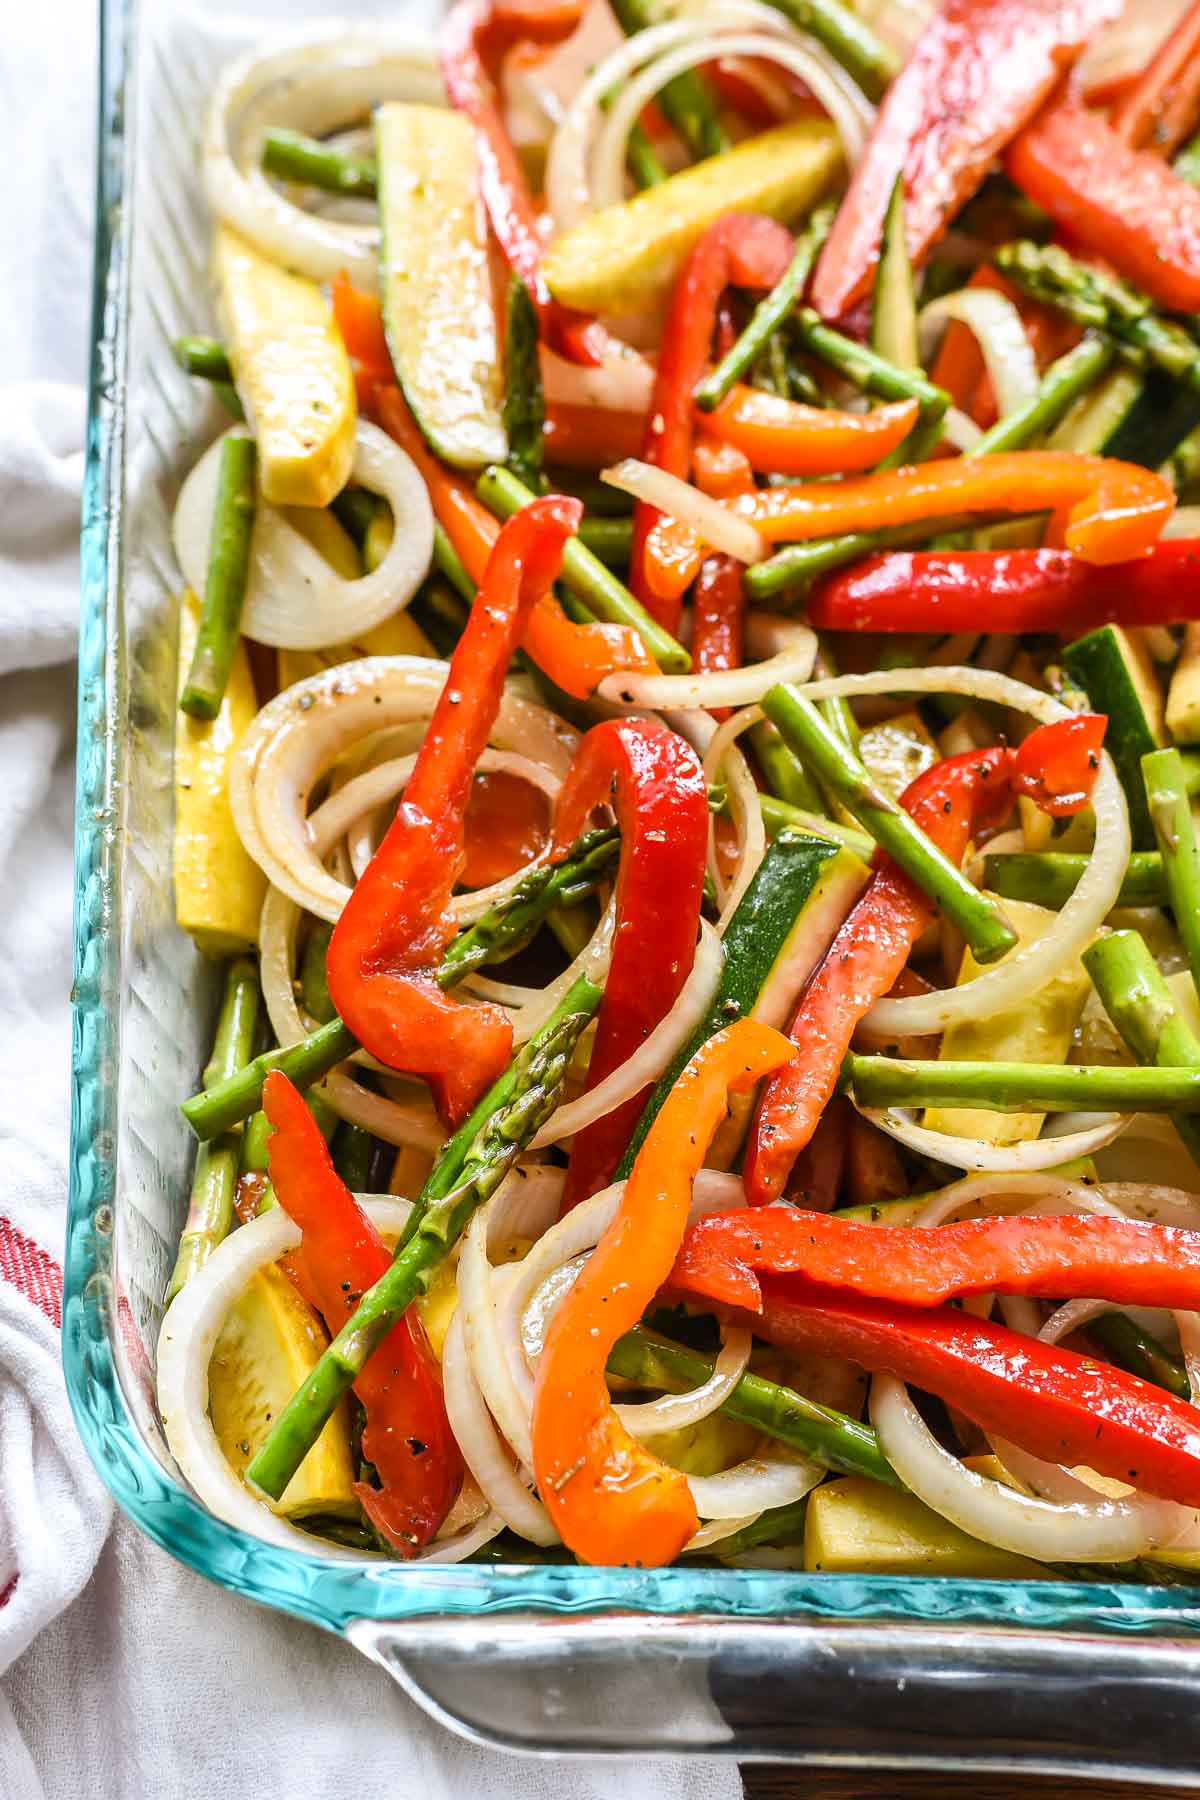 Balsamic Grilled Vegetables are an easy, flavorful side dish for the summer!